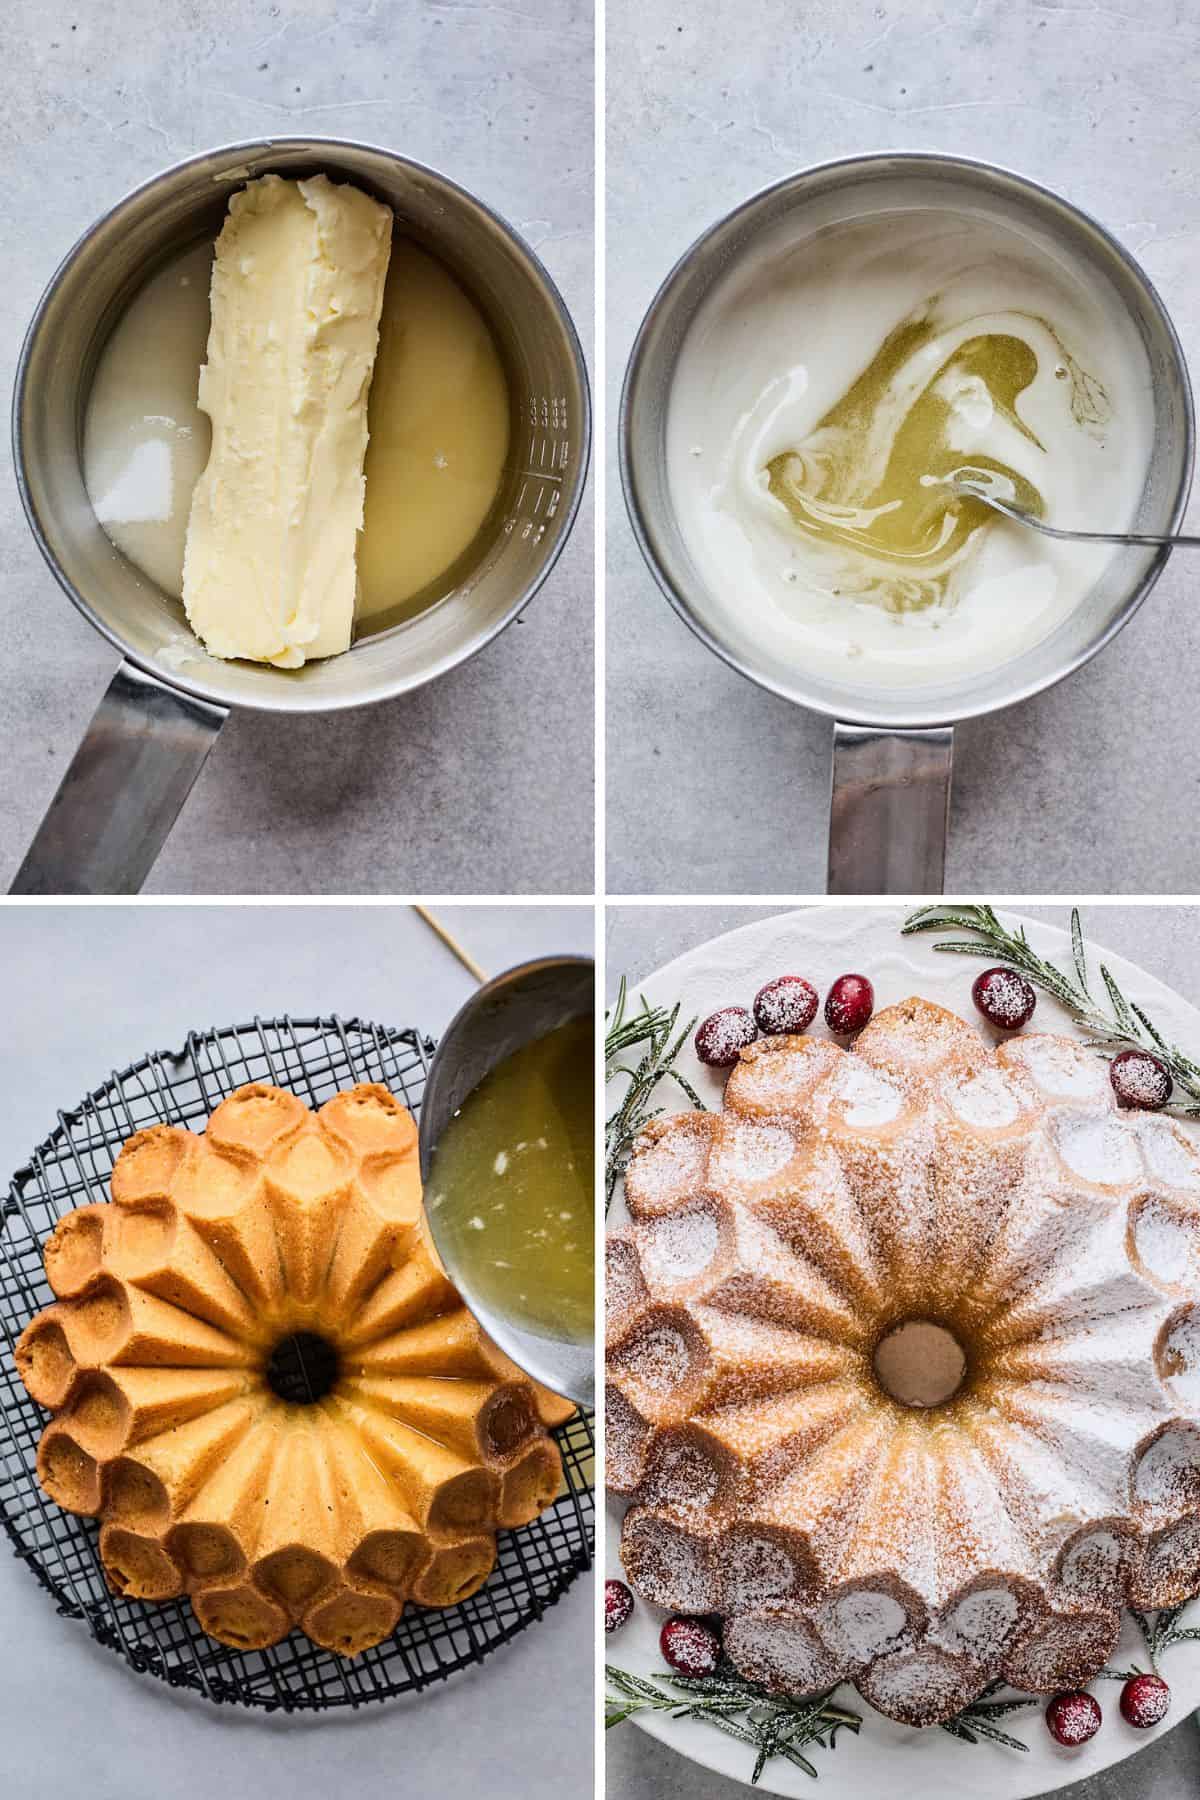 A collage of images showing making the buttered rum sauce and then adding it to the cake and decorating it after it's finished.